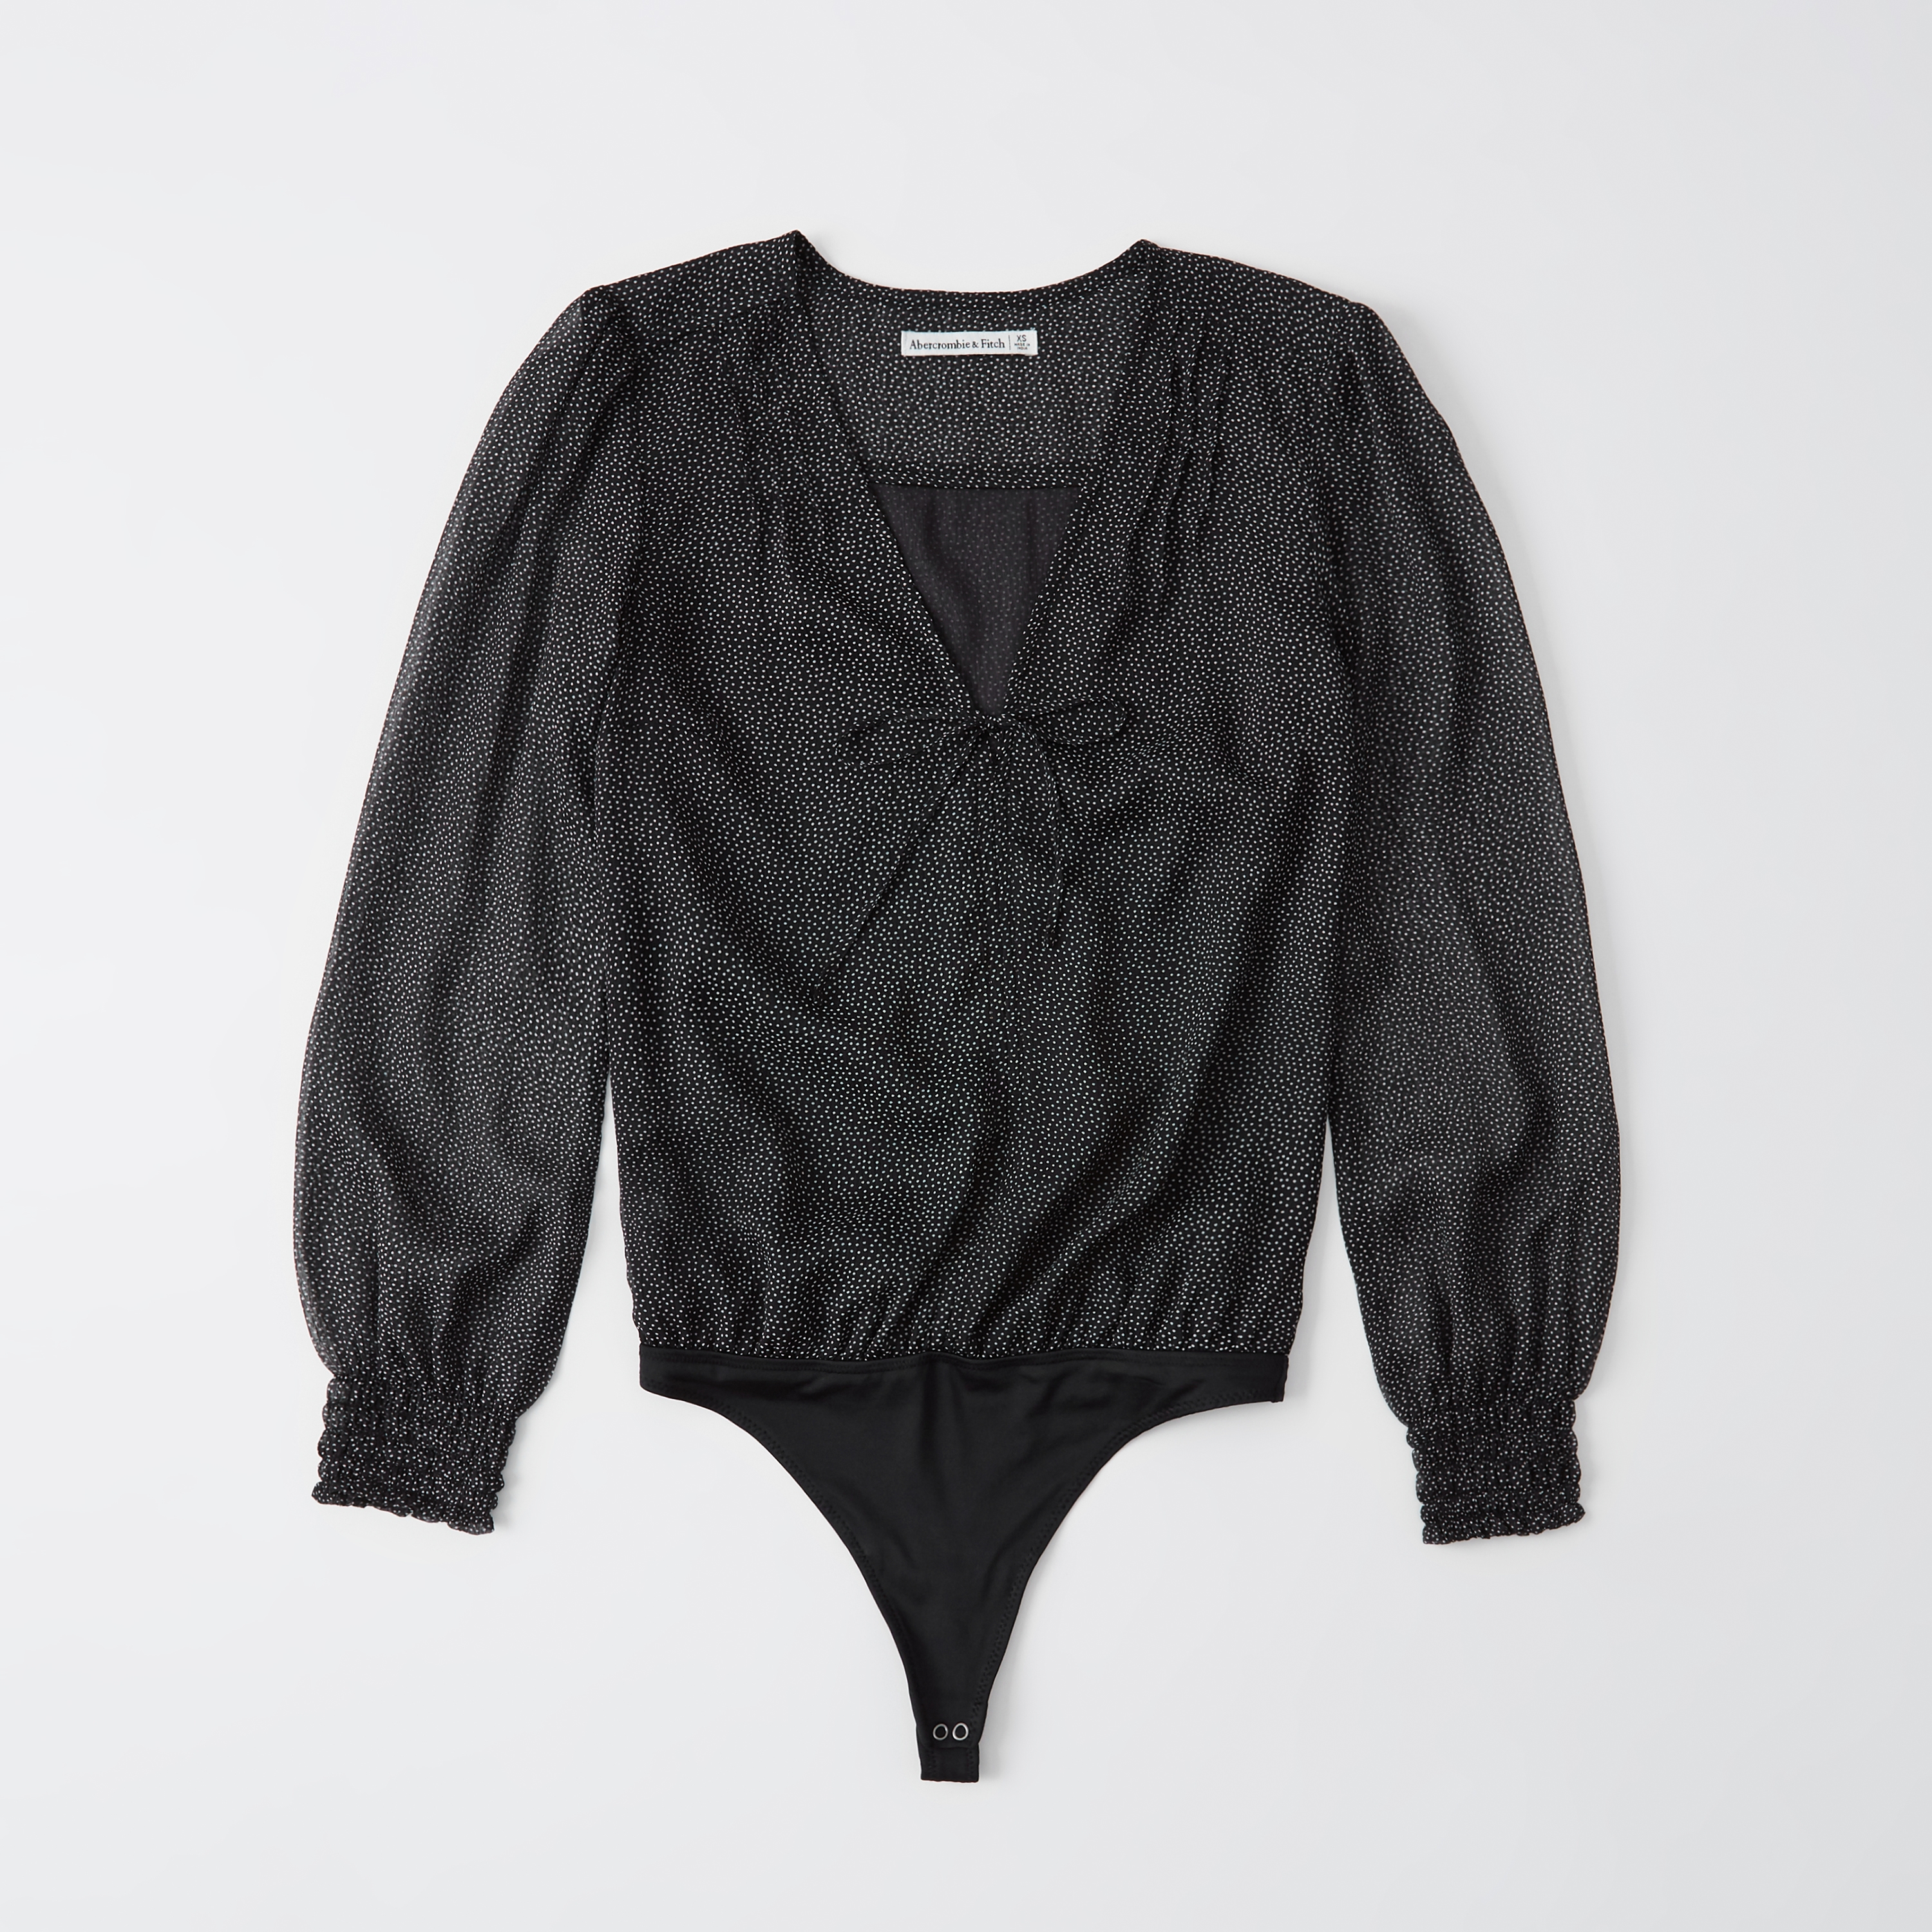 abercrombie and fitch blousy bodysuit